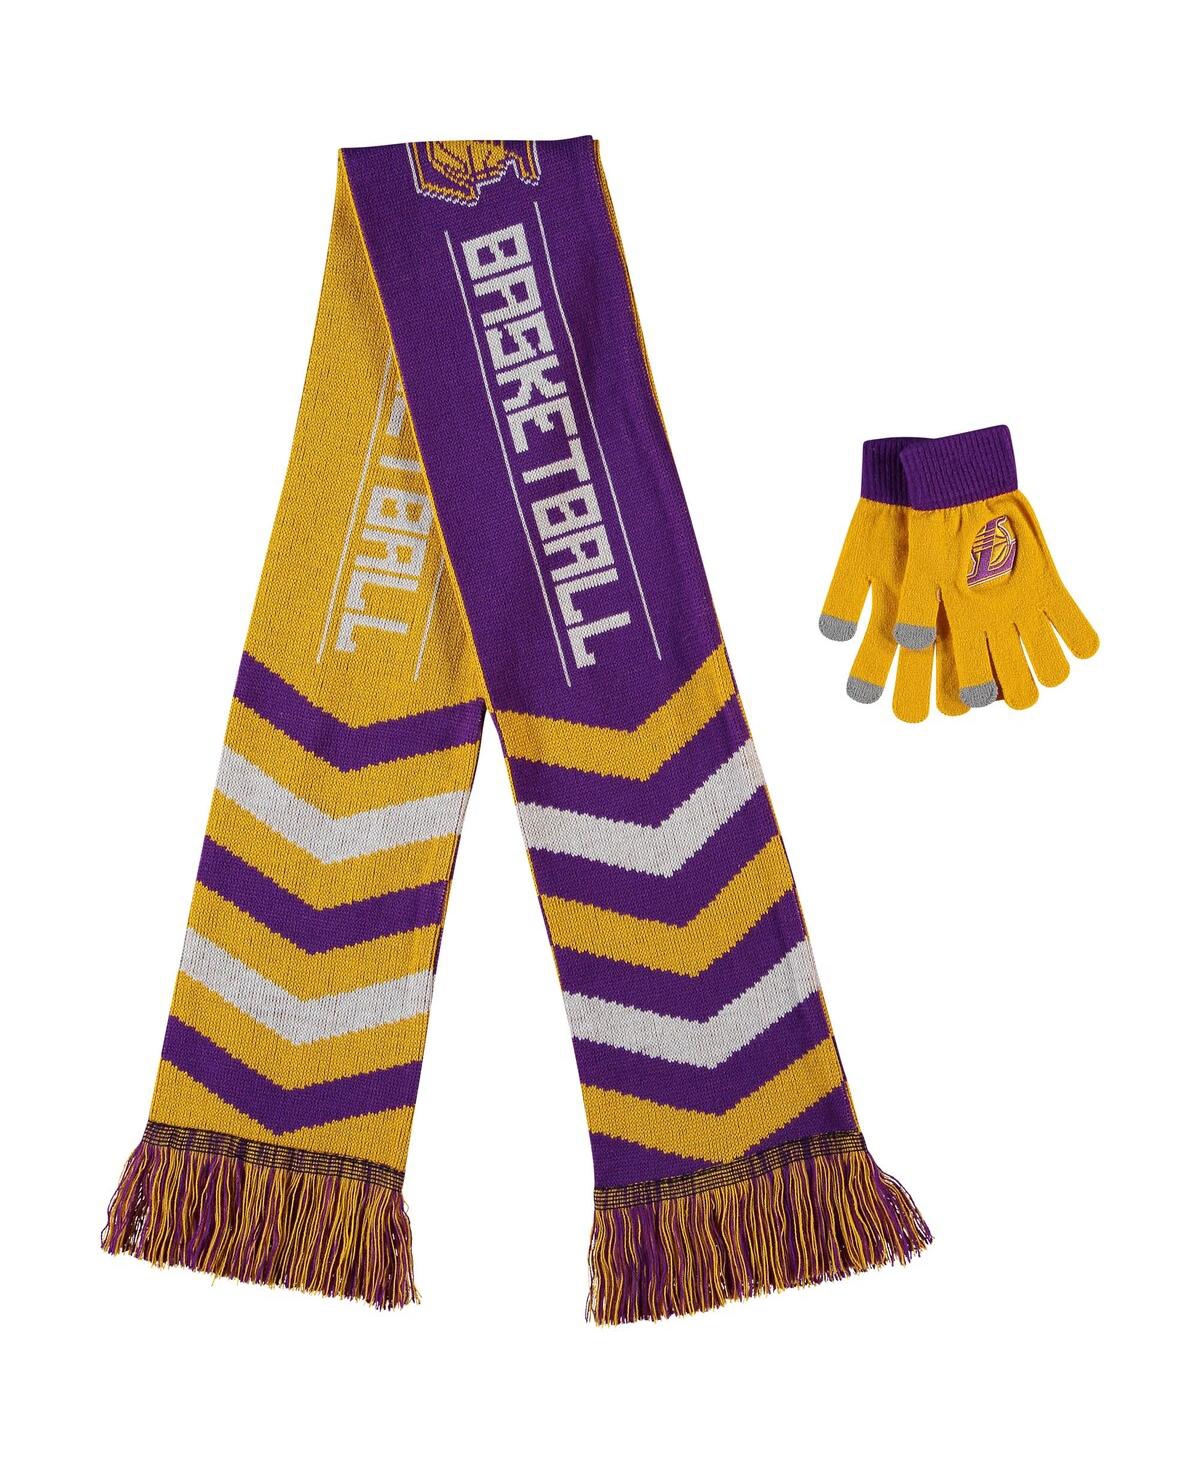 FOCO MEN'S AND WOMEN'S FOCO GOLD LOS ANGELES LAKERS GLOVE AND SCARF COMBO SET